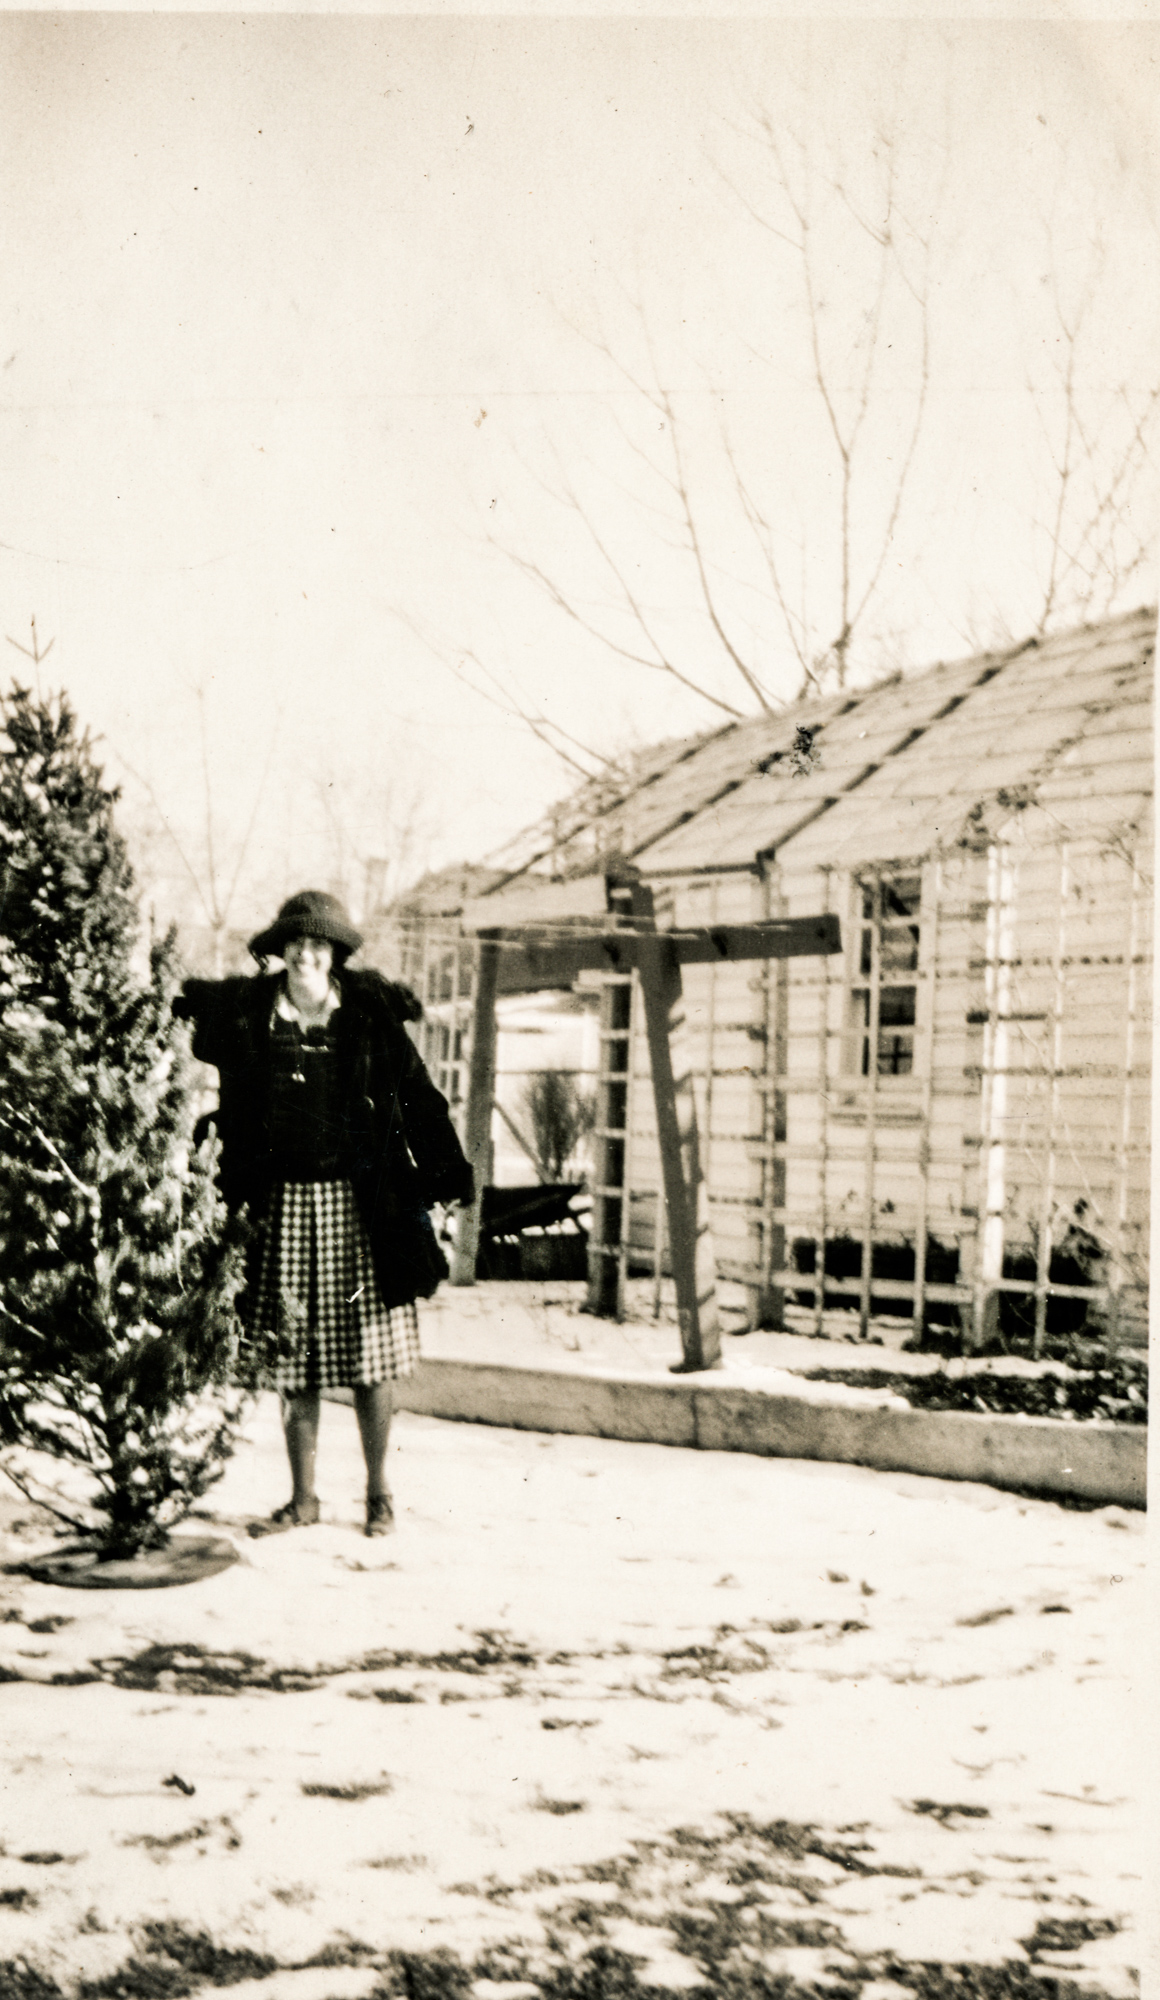 Dauth Family Archive - Circa 1923 - Elizabeth Dauth With Christmas Tree